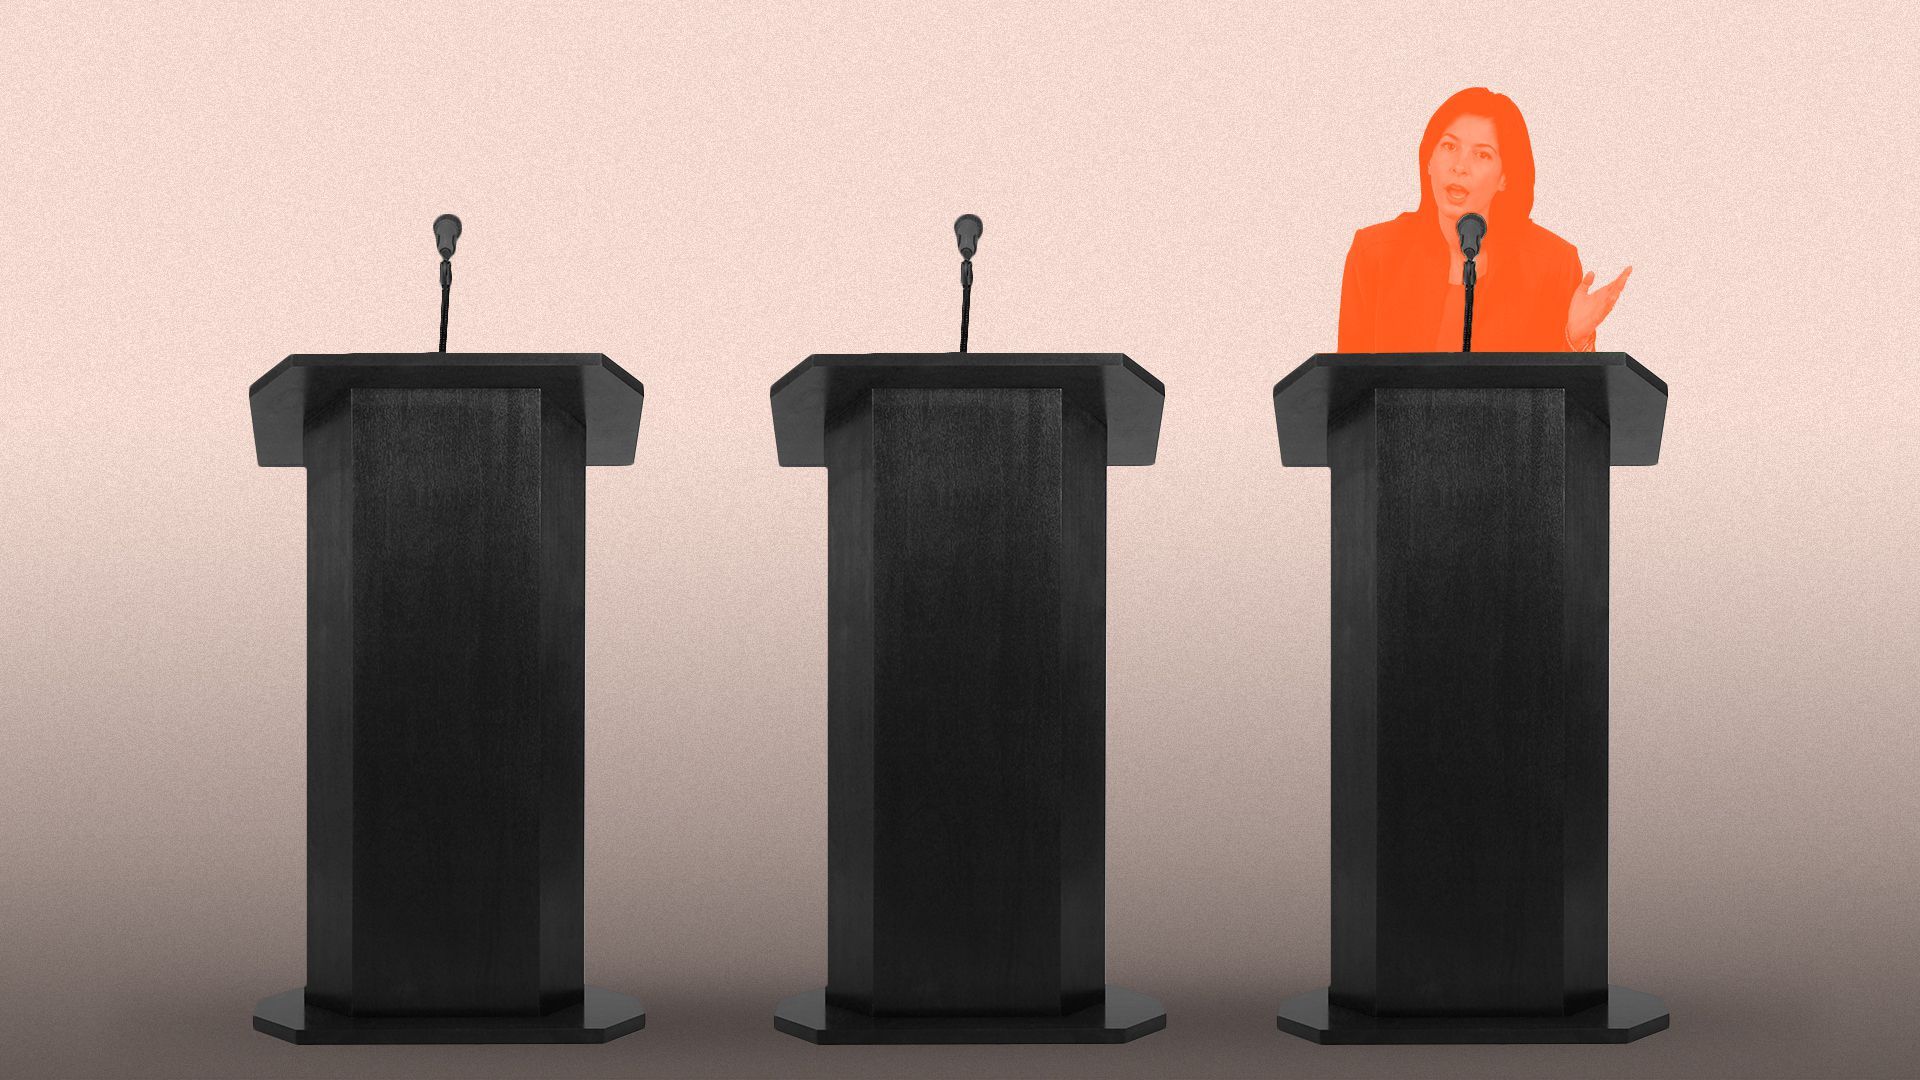 Illustration of three speech podiums, with two unoccupied by any politician